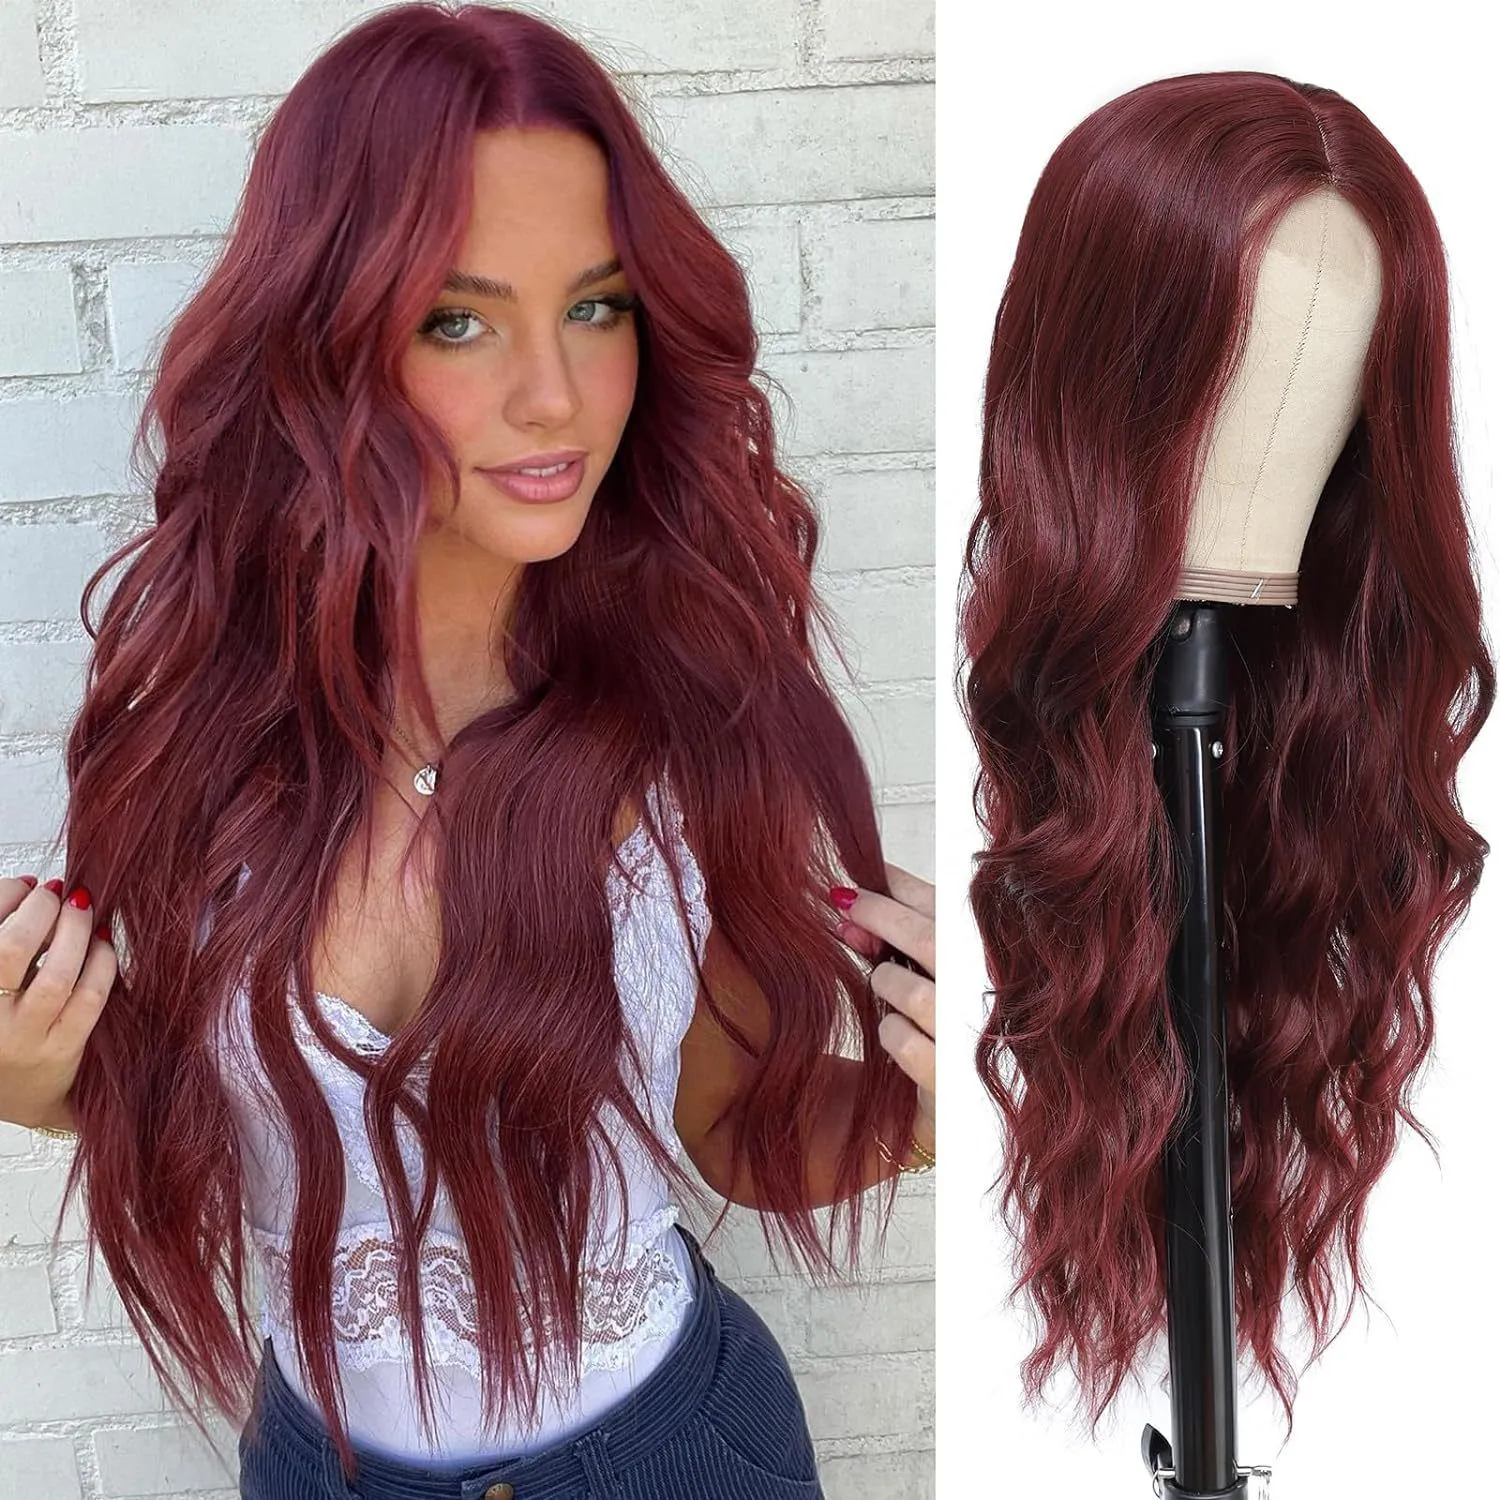 Long Deep Wave Full Lace Front Wigs Human Hair curly hair wigs female lace wigs synthetic natural hair lace wigs fast shipping